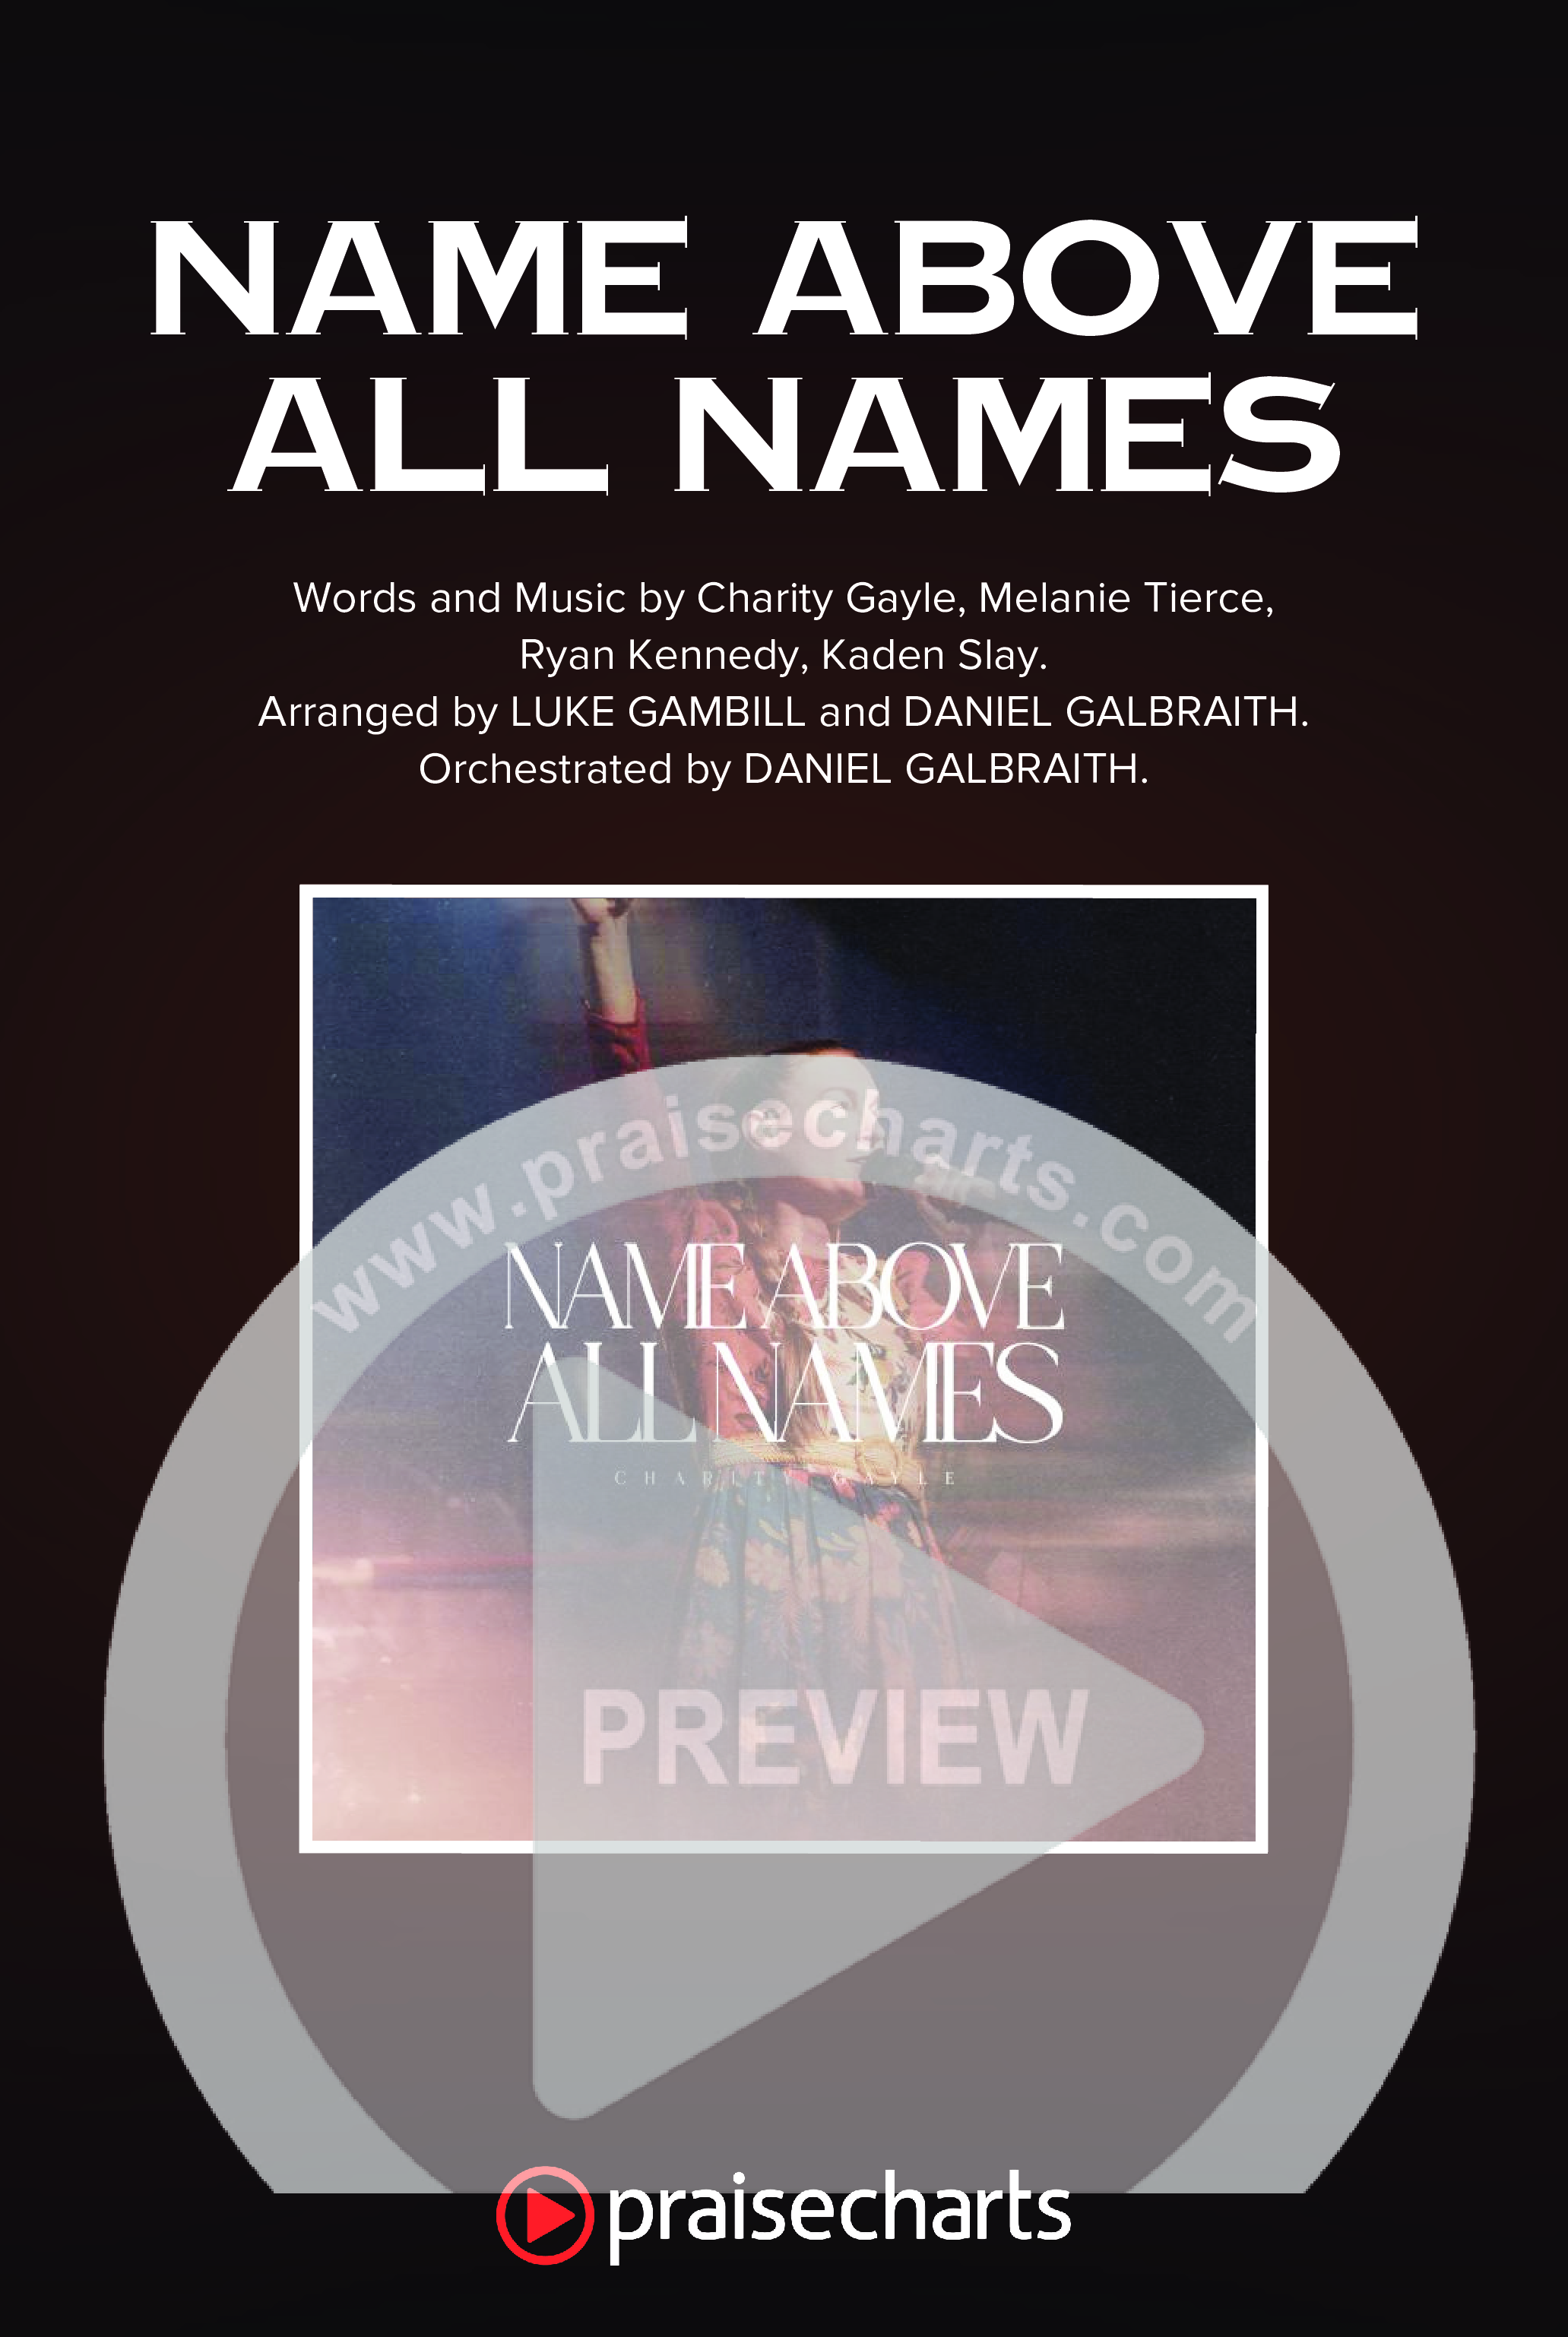 Name Above All Names (Worship Choir/SAB) Octavo Cover Sheet (Charity Gayle / Arr. Luke Gambill)